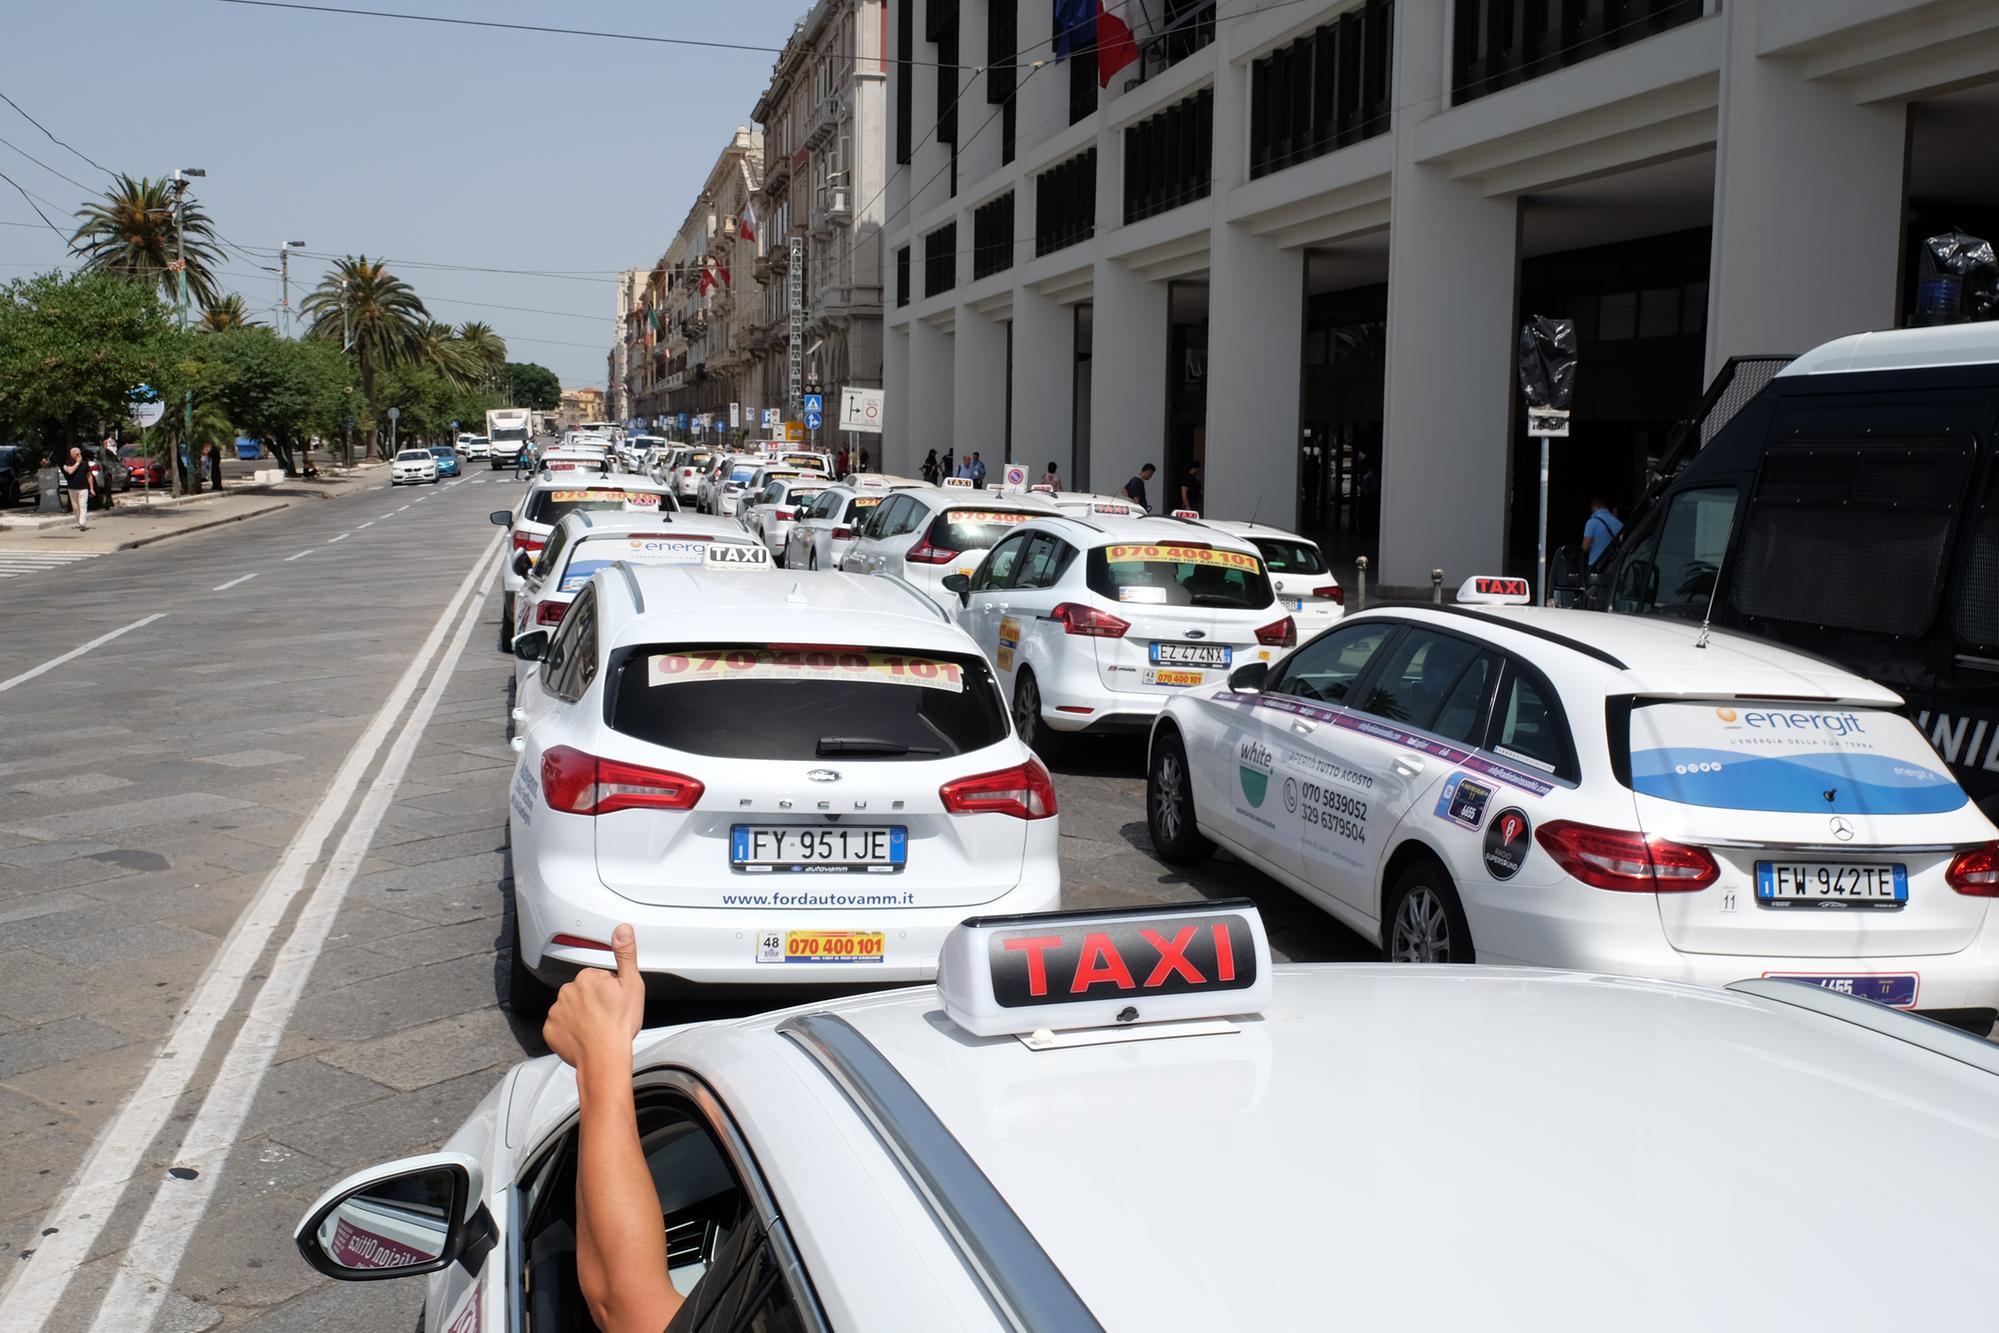 City center paralyzed, the taxi drivers' strike sends traffic into a tailspin in Cagliari